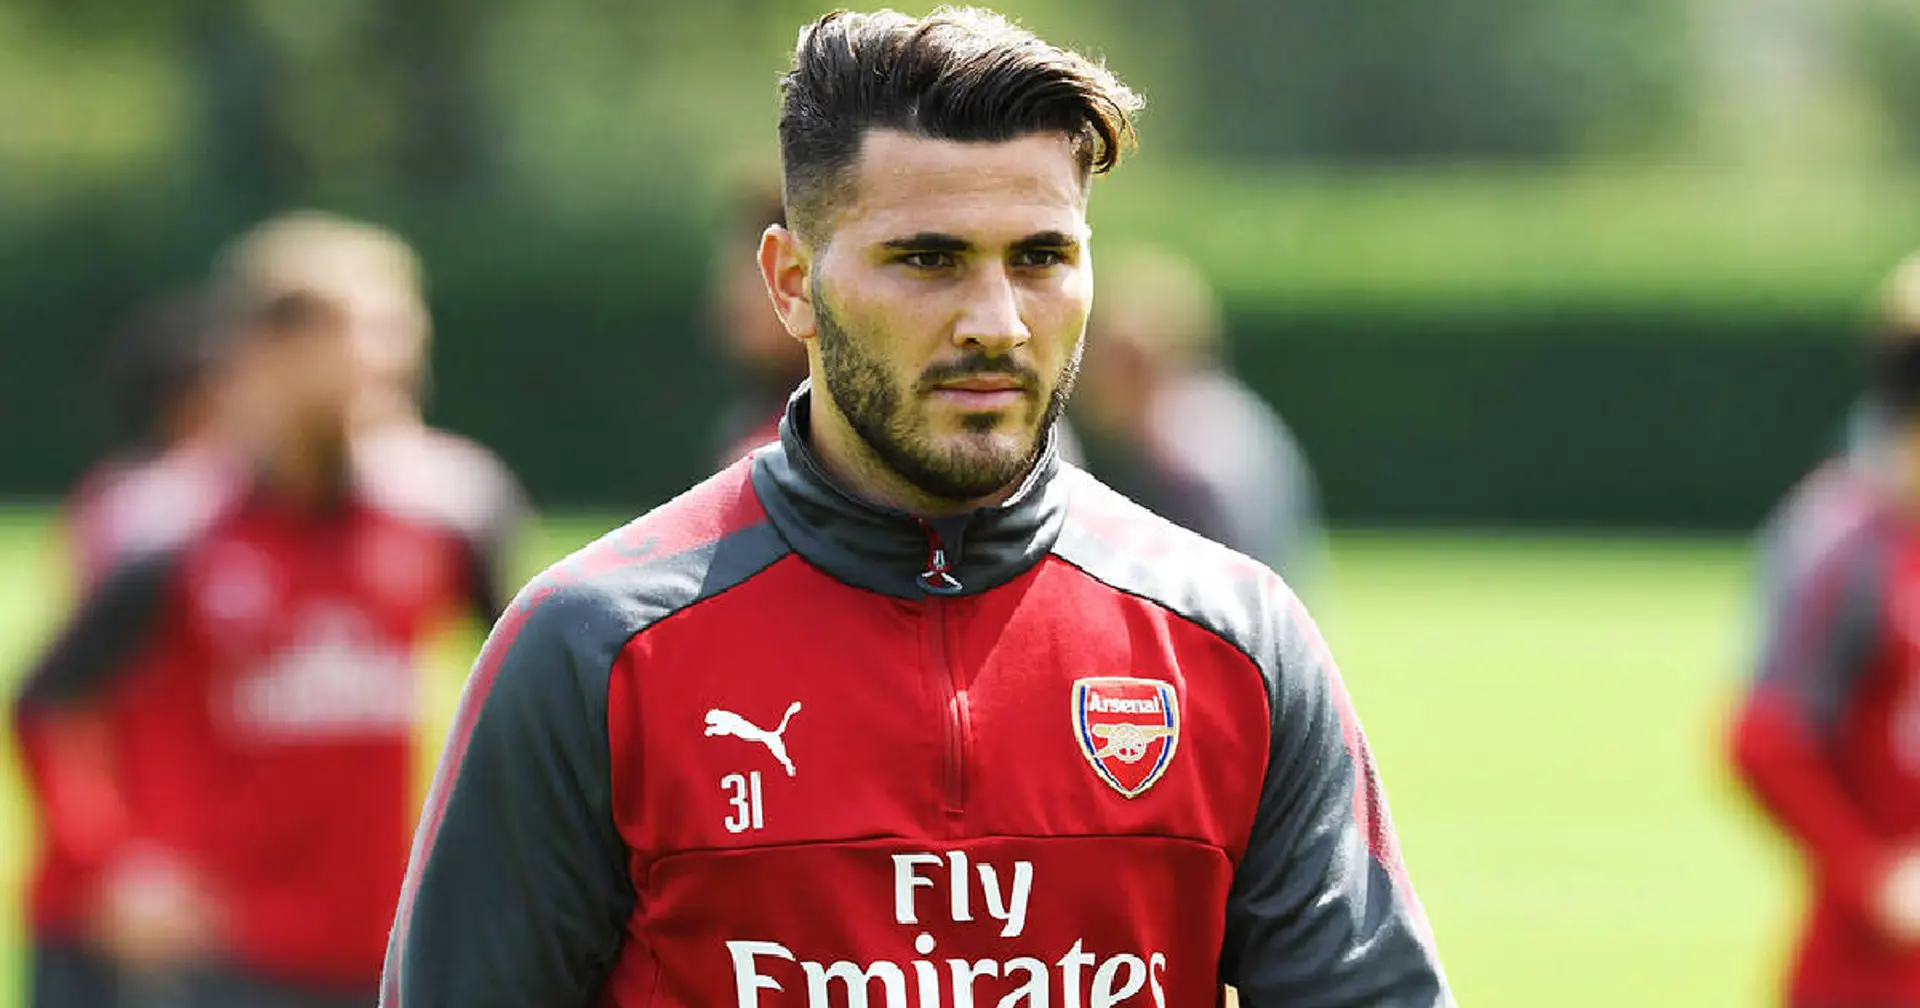 Kolasinac negotiating to get his Arsenal contract  terminated as he eyes Fenerbahce move (reliability: 3 stars)